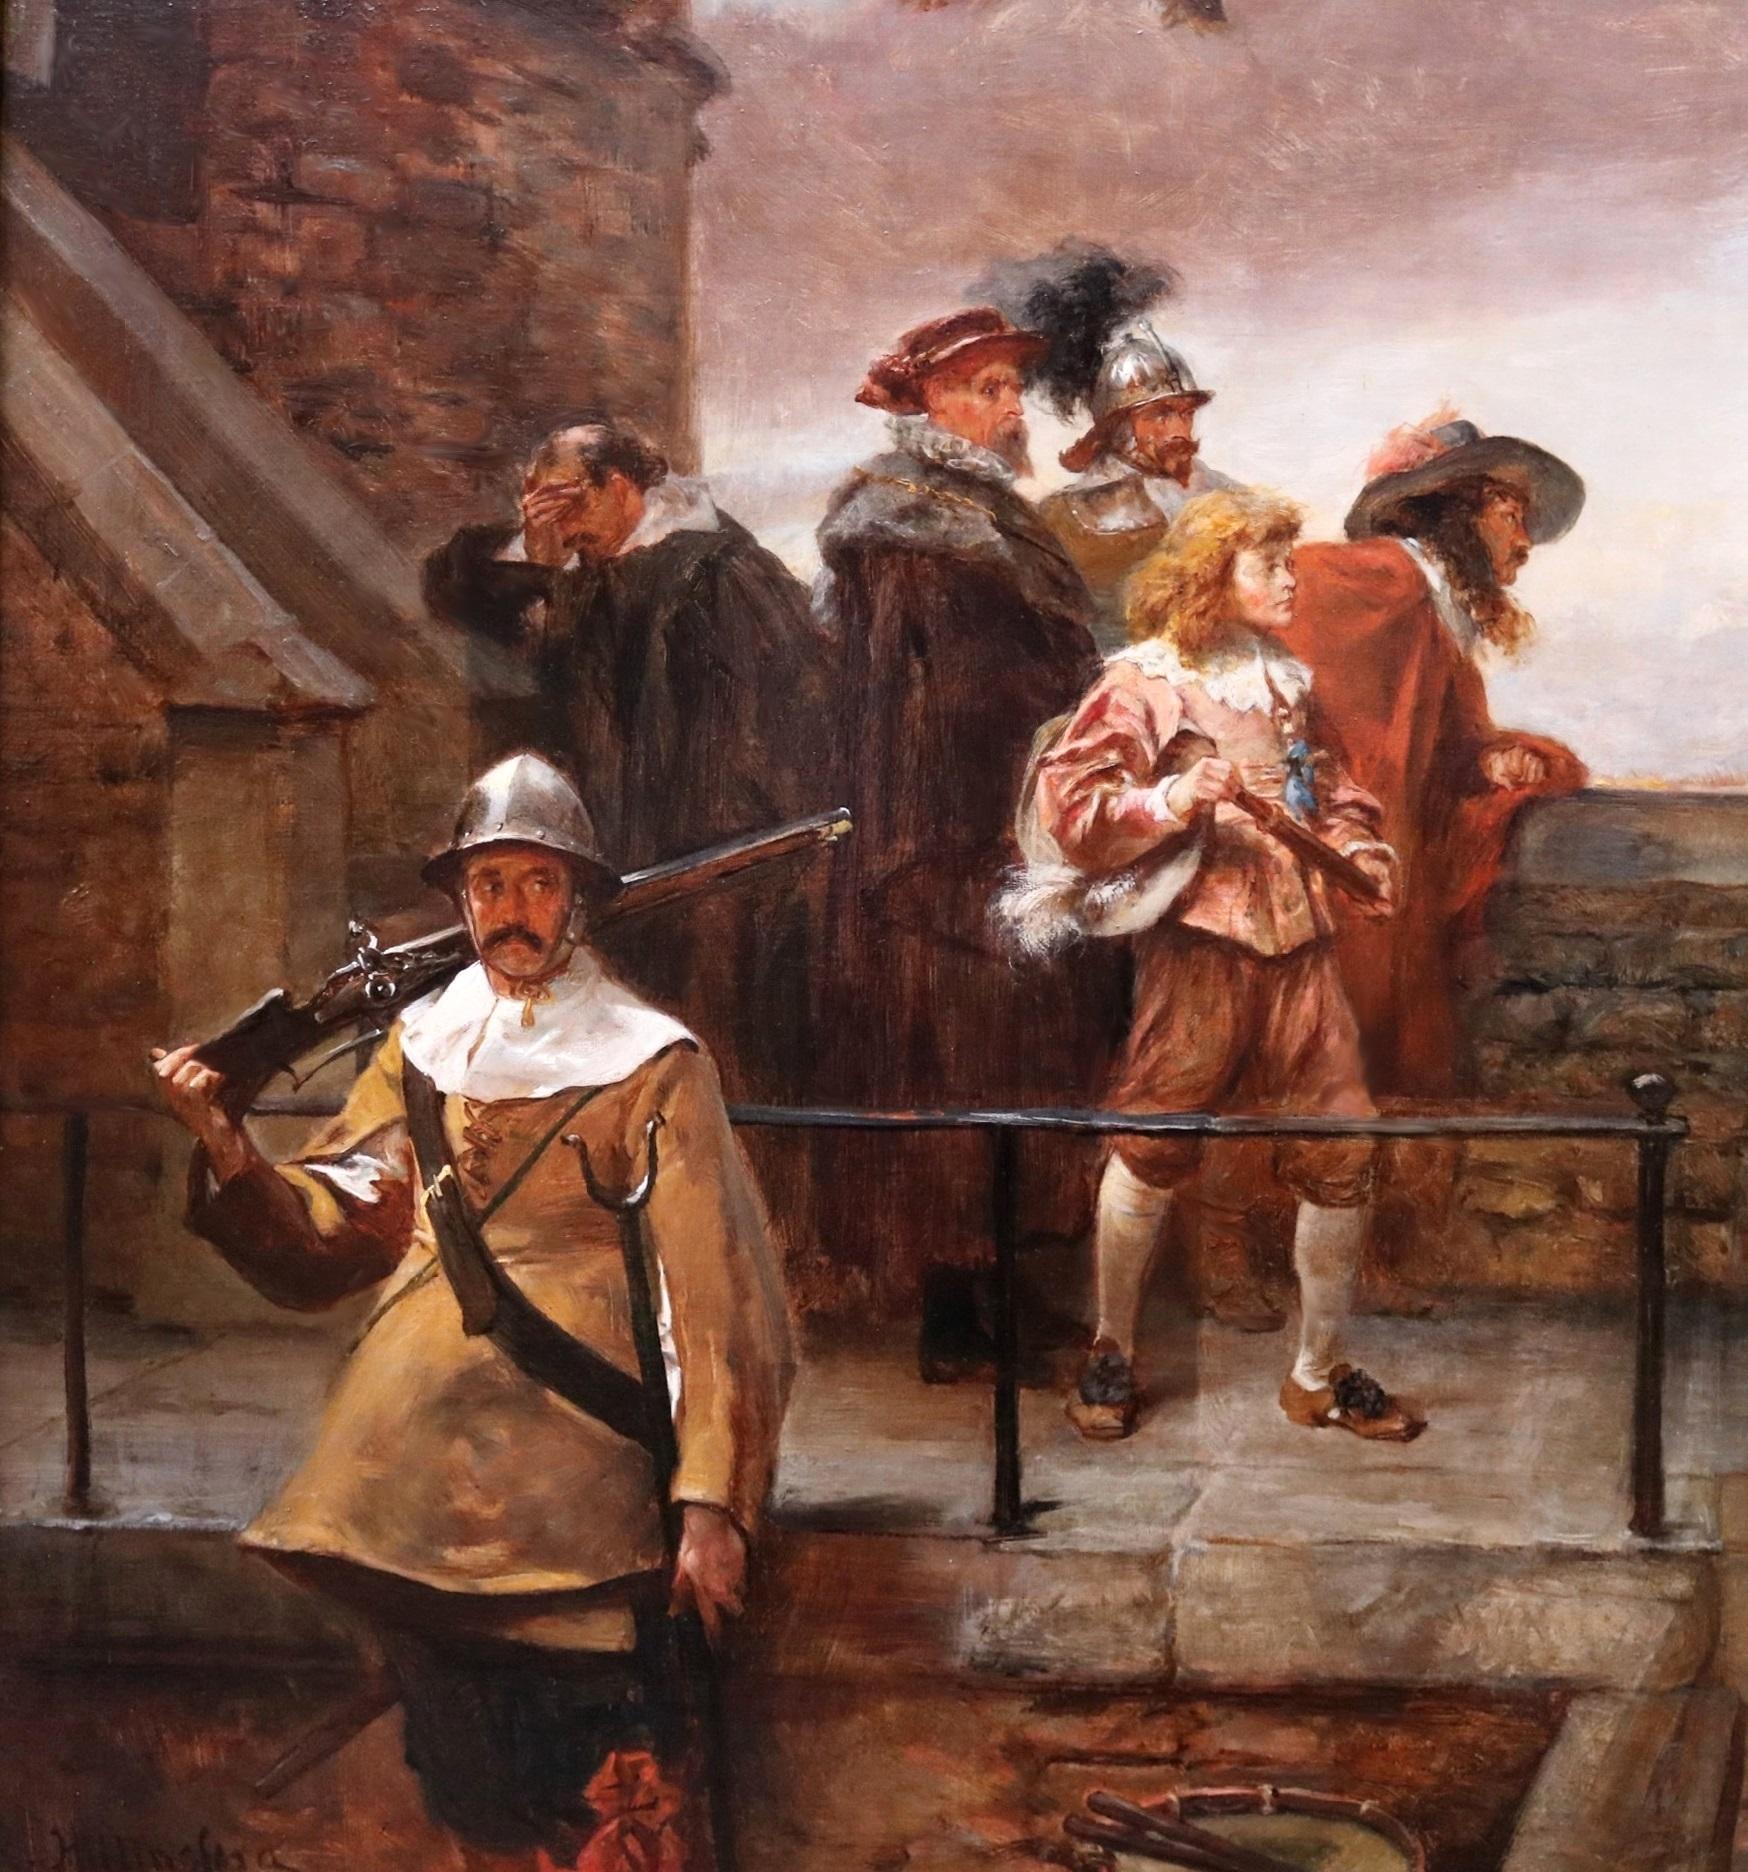 ‘Charles I on the Phoenix Tower’ by Robert Alexander Hillingford. The painting – which depicts the King on the fortified city walls of Chester having just witnessed the rout of his army at the Battle of Rowton Heath – is signed by the artist and